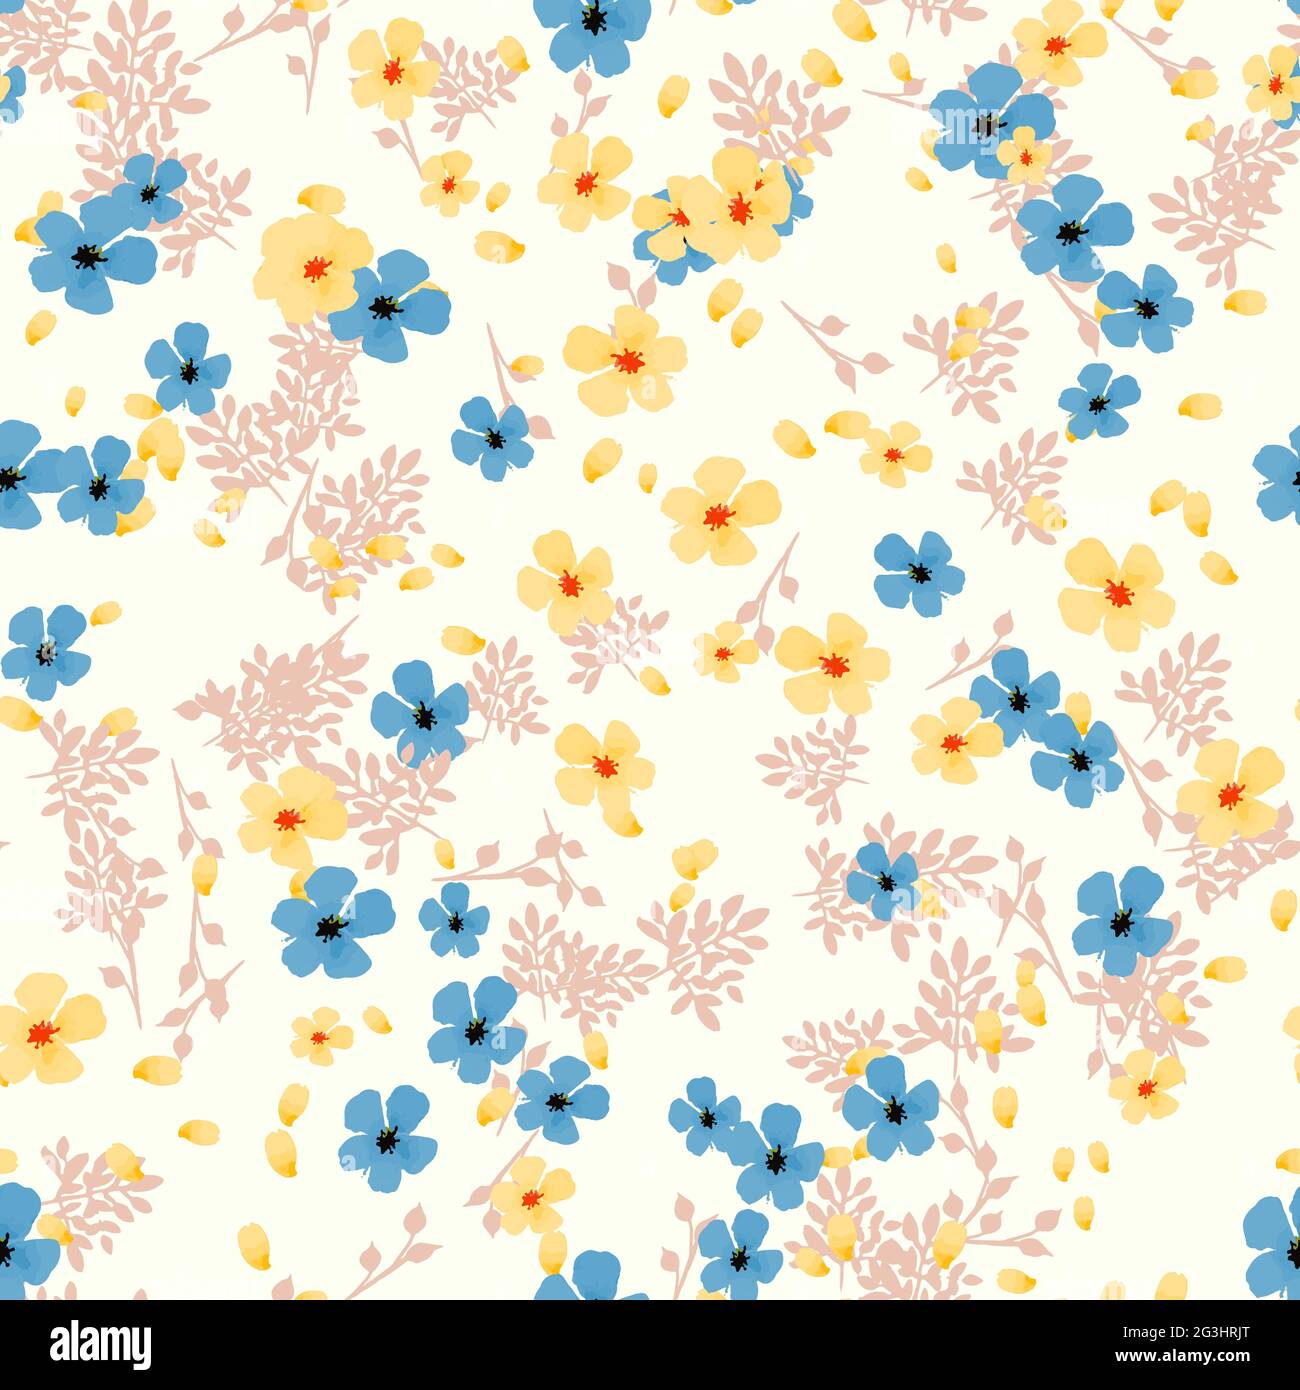 Elegant floral pattern in small flower. Liberty style. Floral